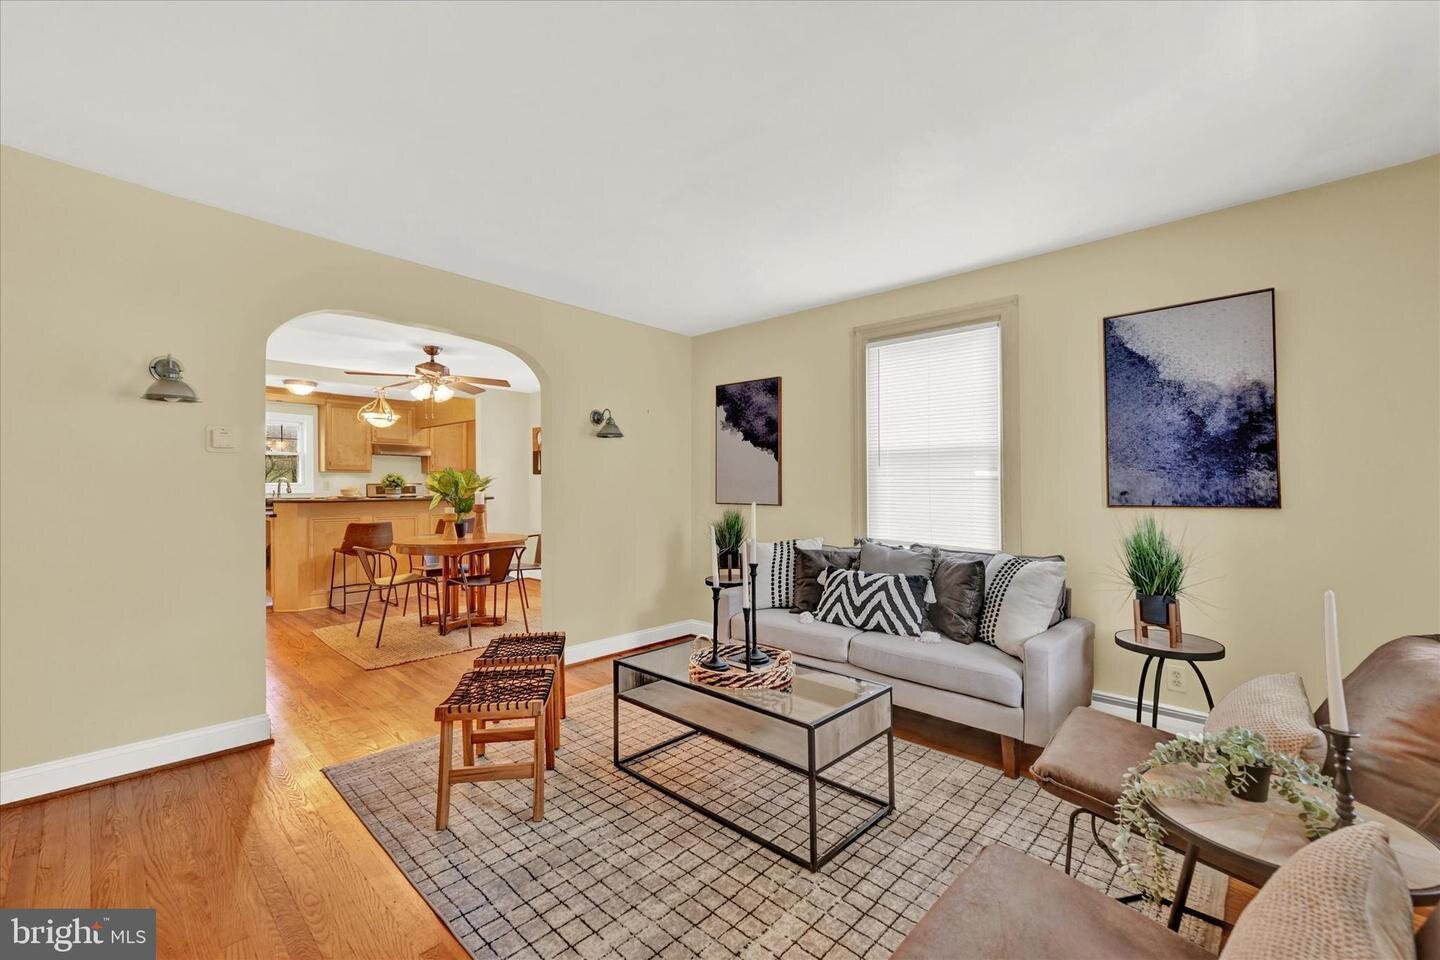 Another Deal in the Bag!🎉

Big congrats to our savvy buyers for snagging this gem in Idlewylde!

They fell in love with its charm, and who can blame them? From the moment they stepped in at the open house, they knew it was the one. 

With @mshousene